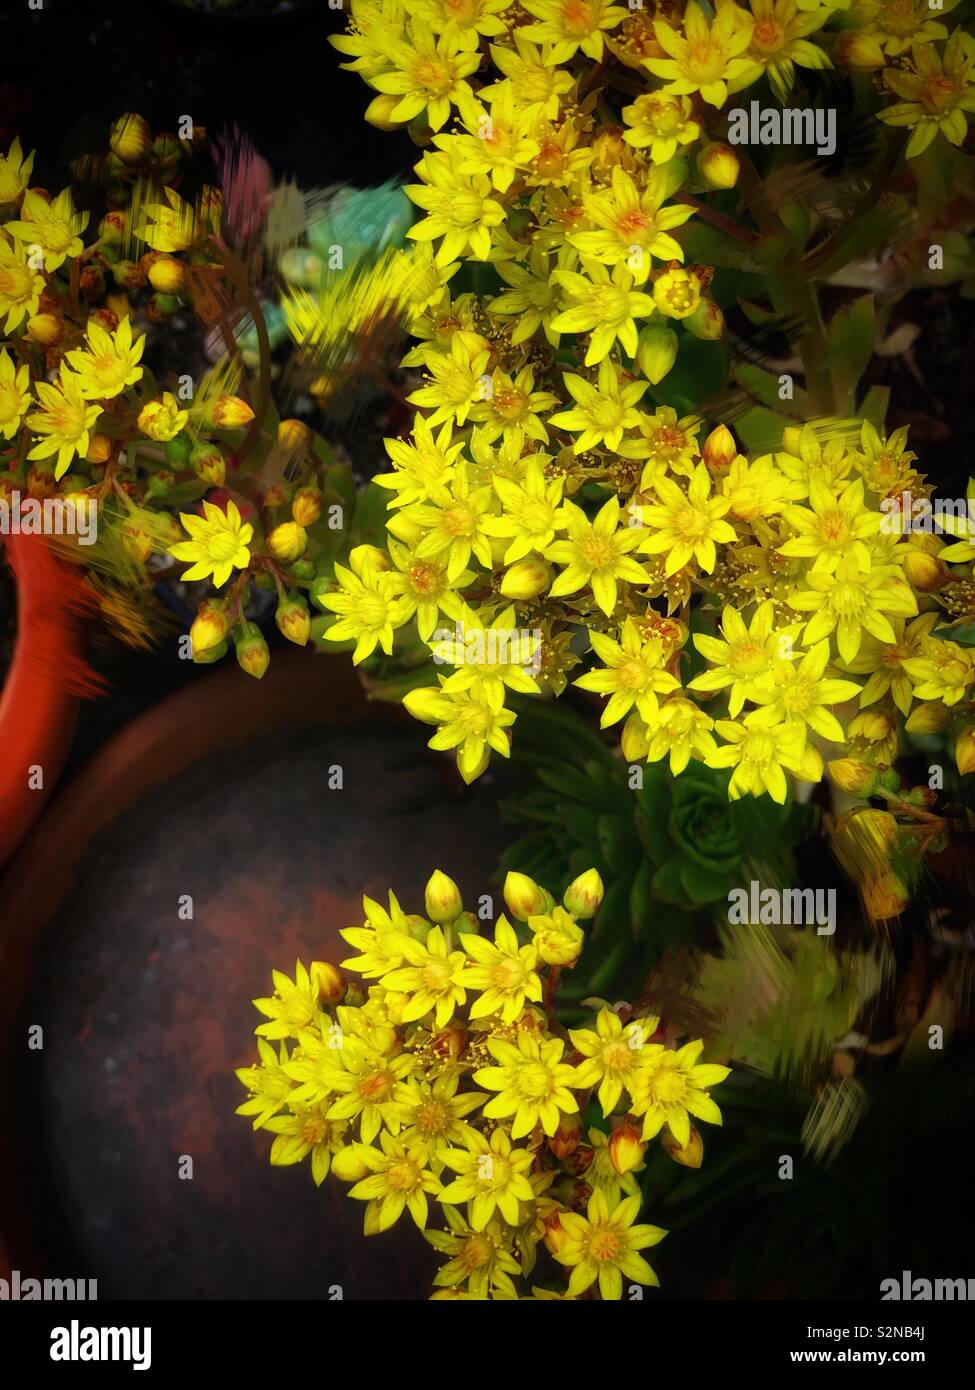 The yellow flowers of Phedimus aizoon (Linnaeus) ‘t Hart growing up from the pots / 黃菜冒出花瓶 Stock Photo